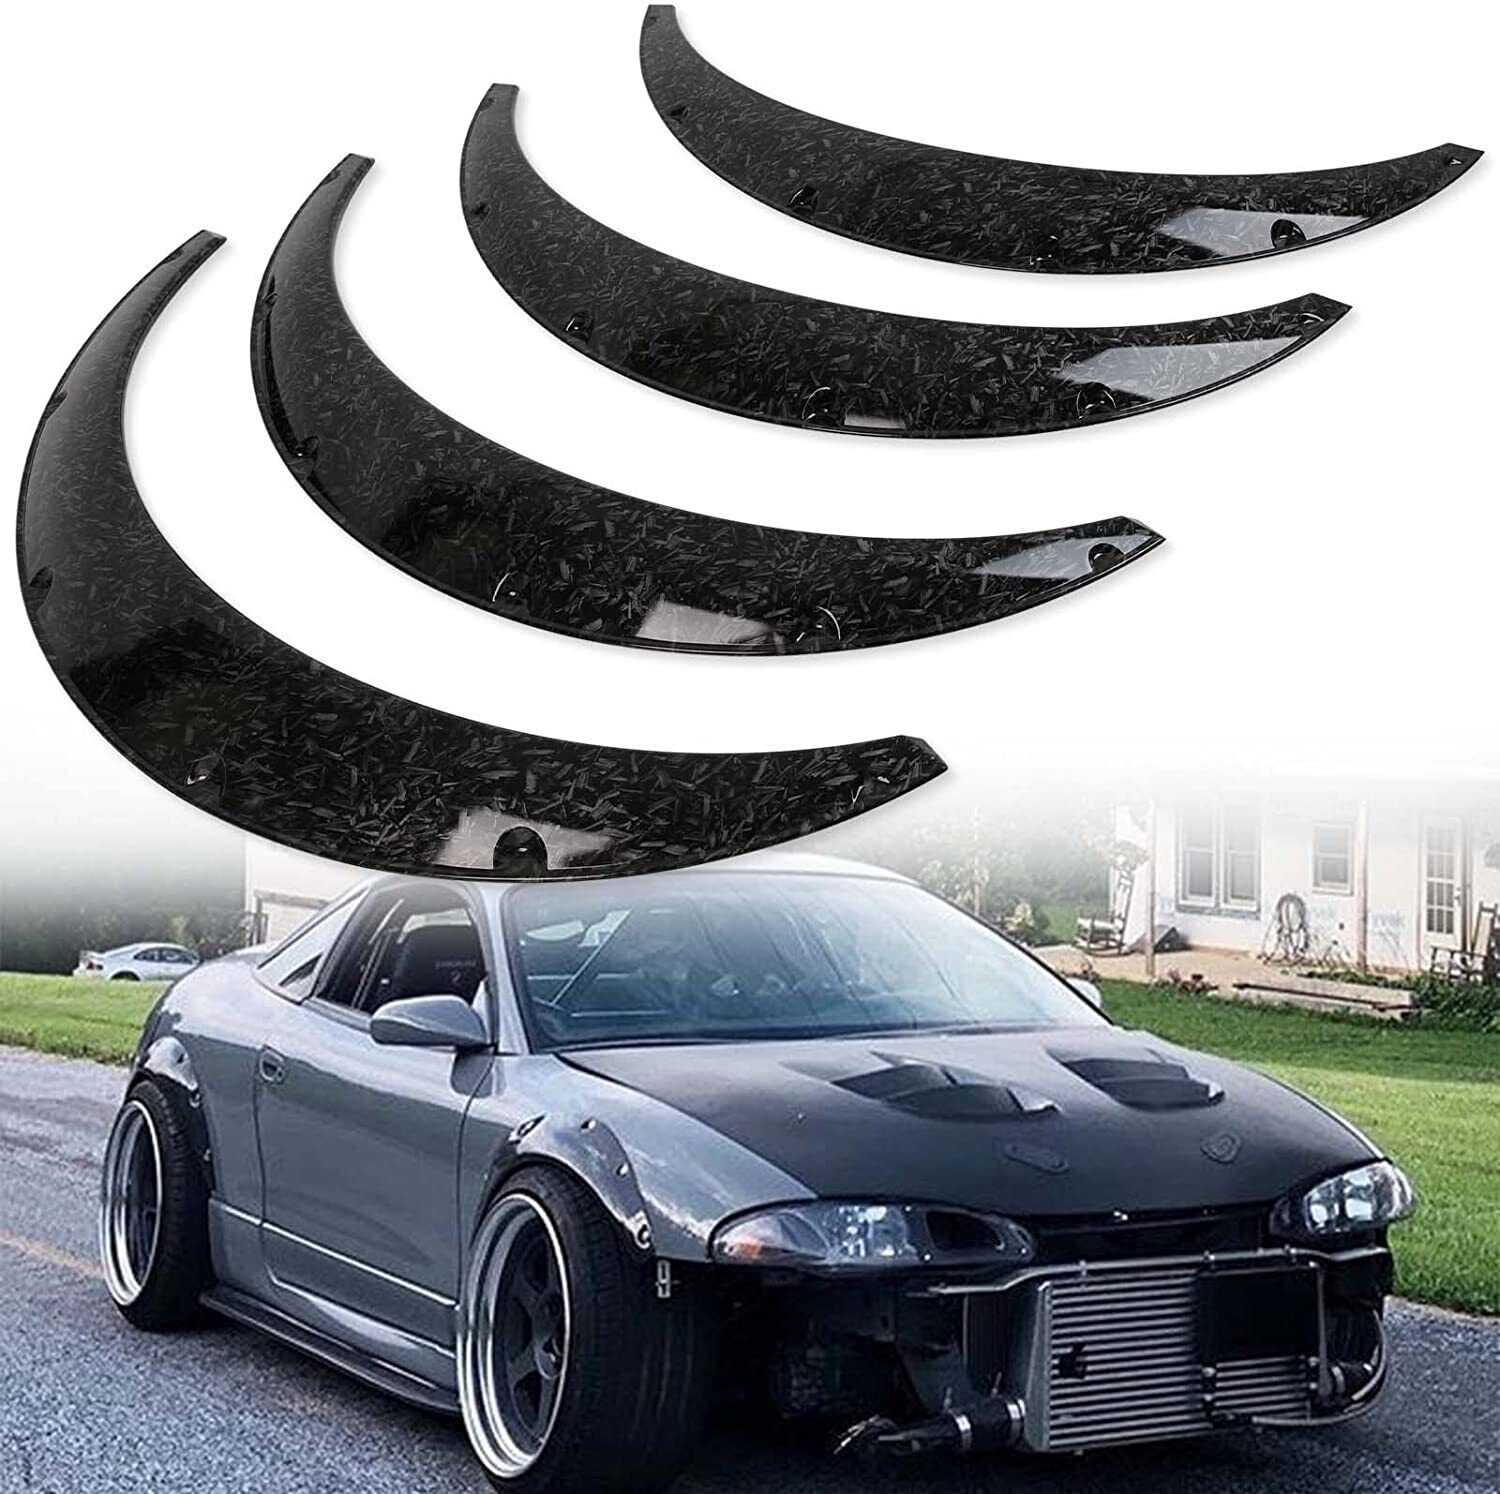 For Mitsubishi Eclipse GSX 4X Fender Flares Wide Body Kit Wheel Arches Protector